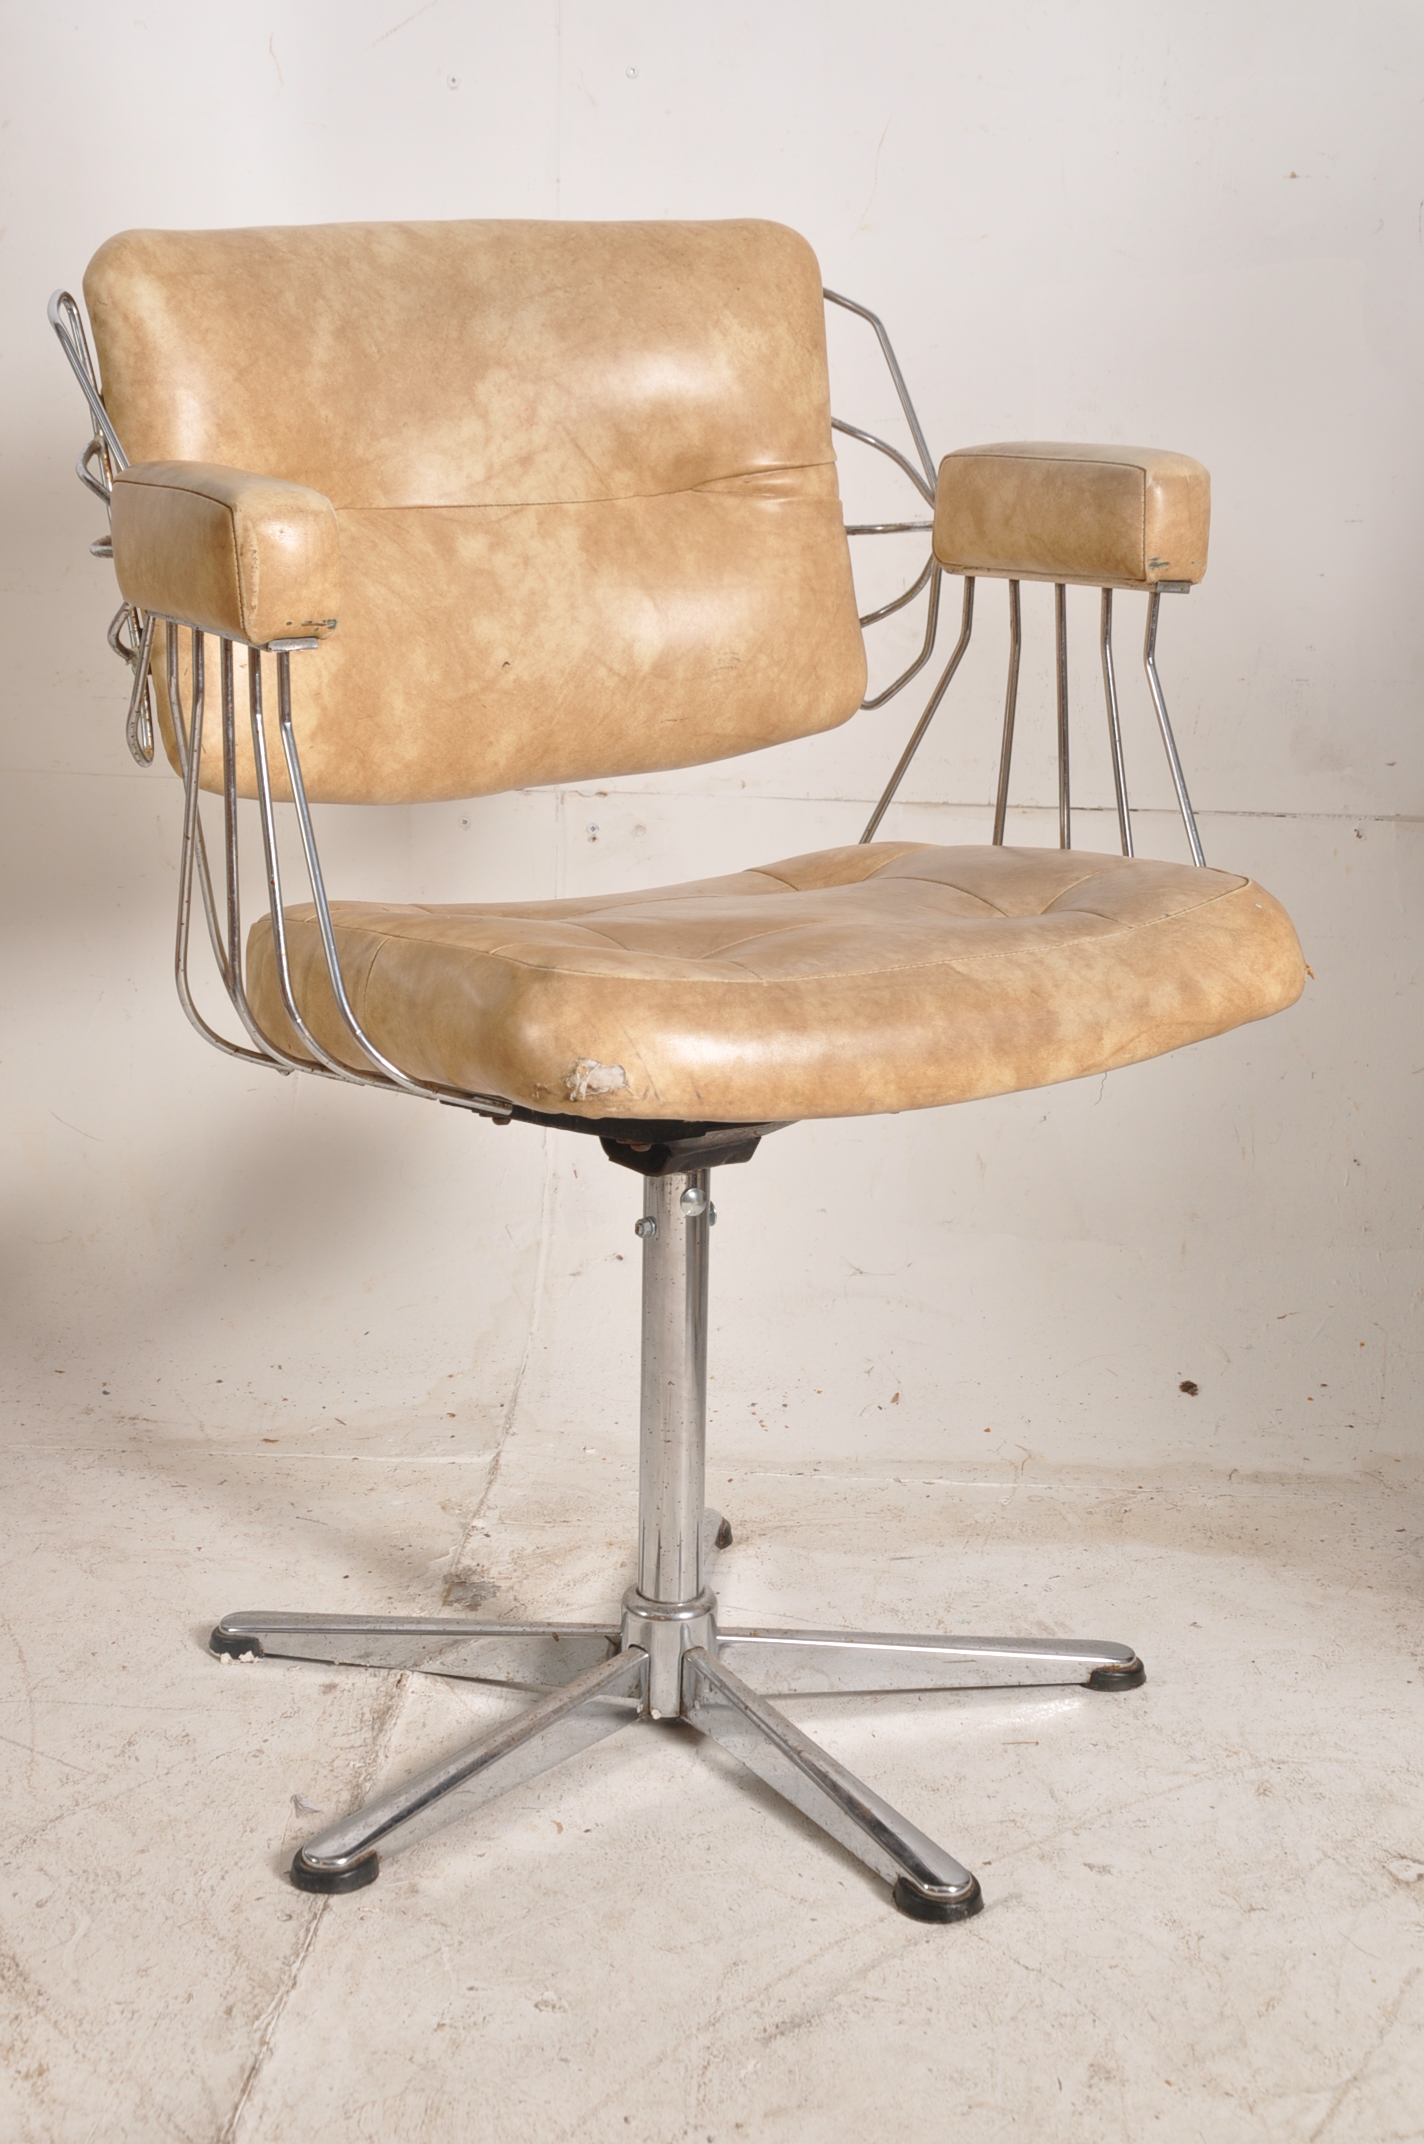 A Harry Bertoia style american wire work chair. Chrome base having original vinyl frame with elbow